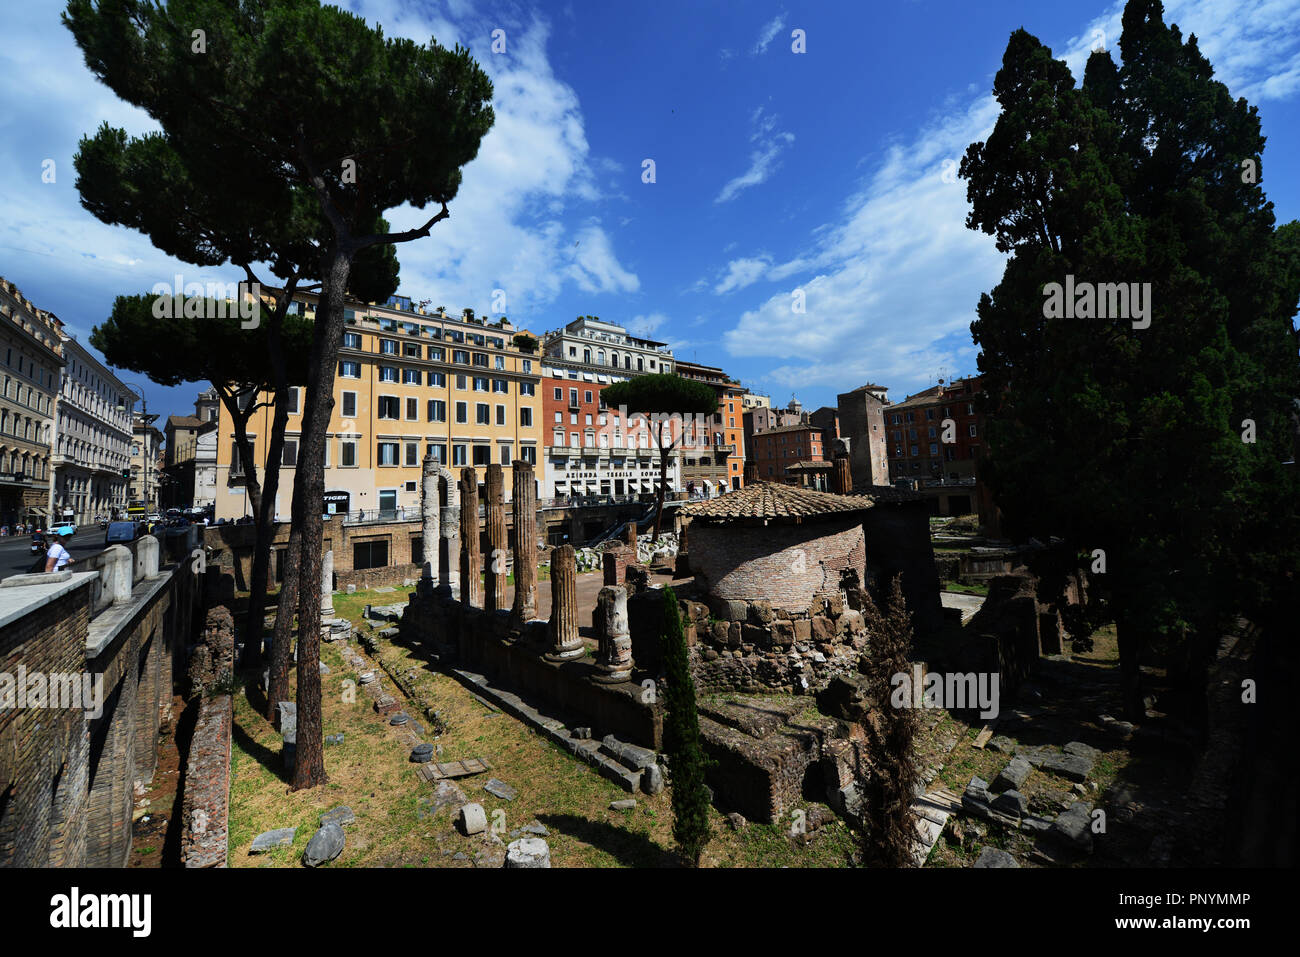 Largo di Torre Argentina is a big square in Rome with many Roman ruins. Stock Photo